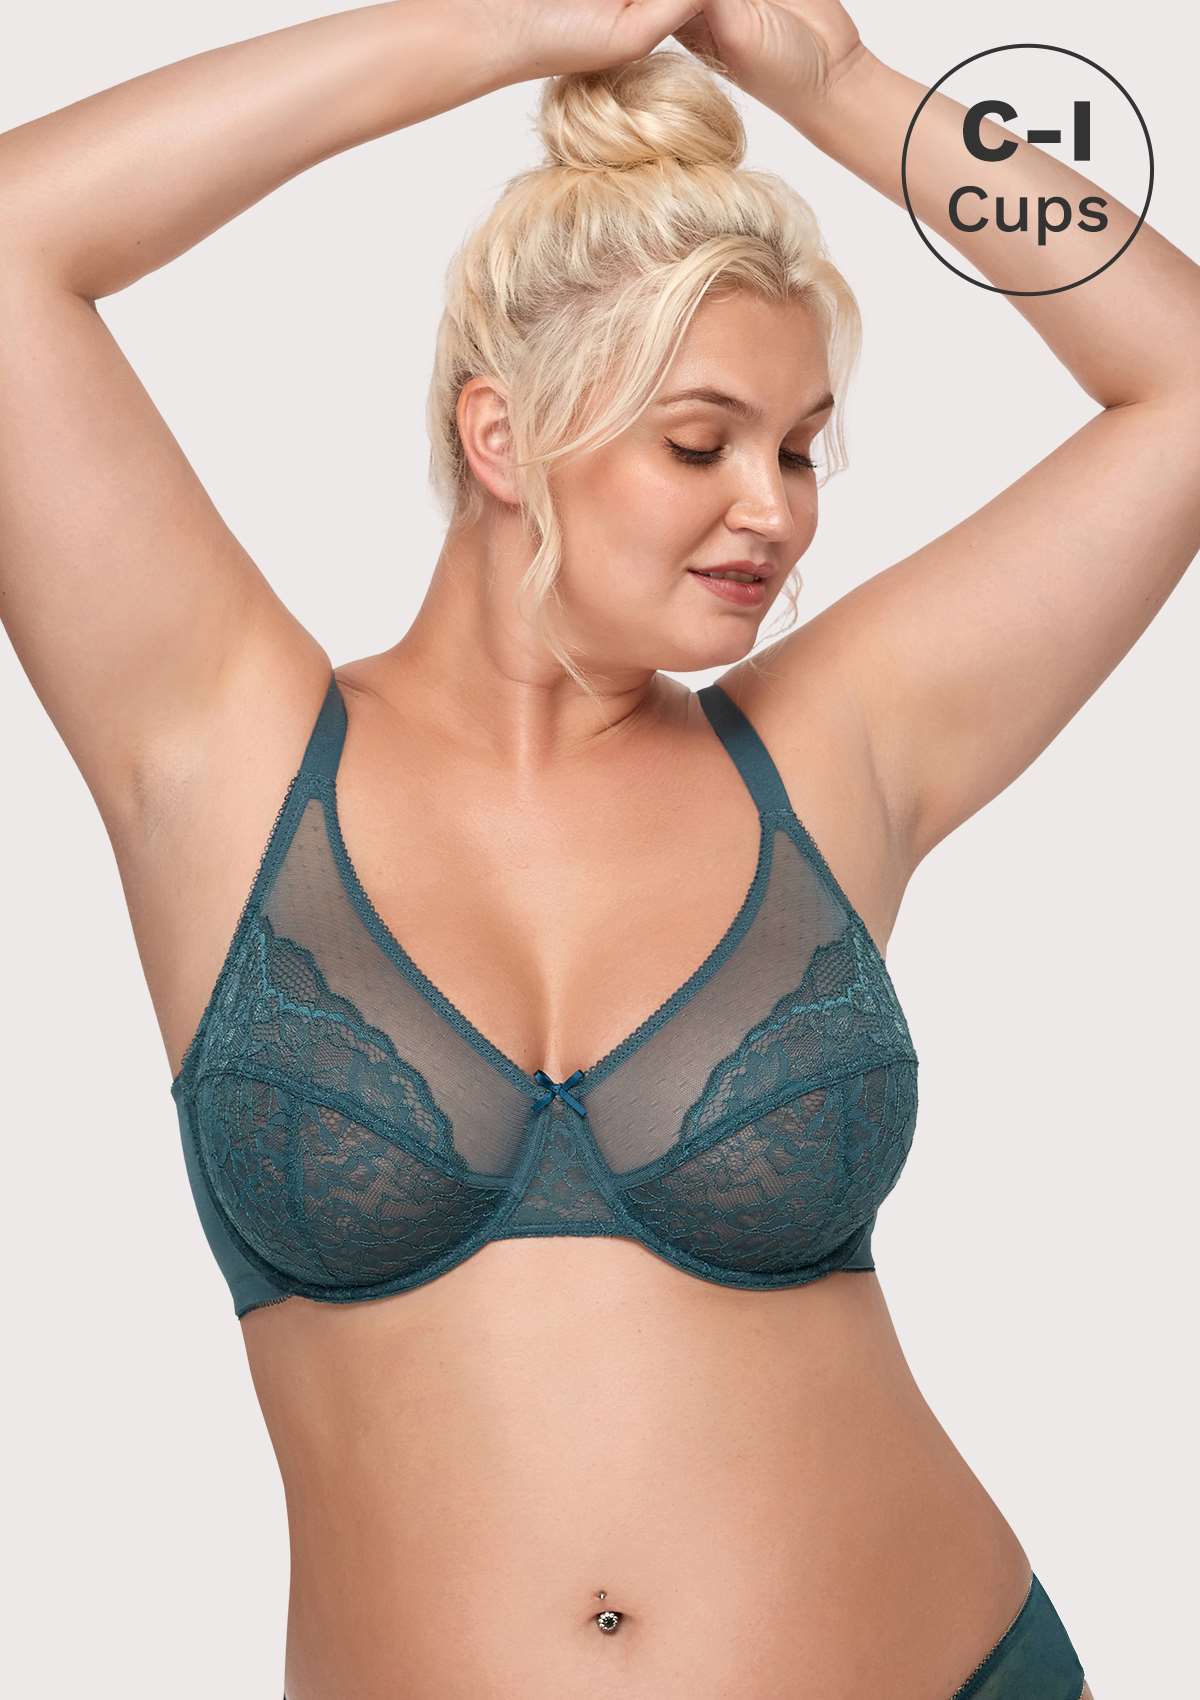 HSIA Enchante Full Coverage Bra: Supportive Bra For Big Busts - Balsam Blue / 46 / C